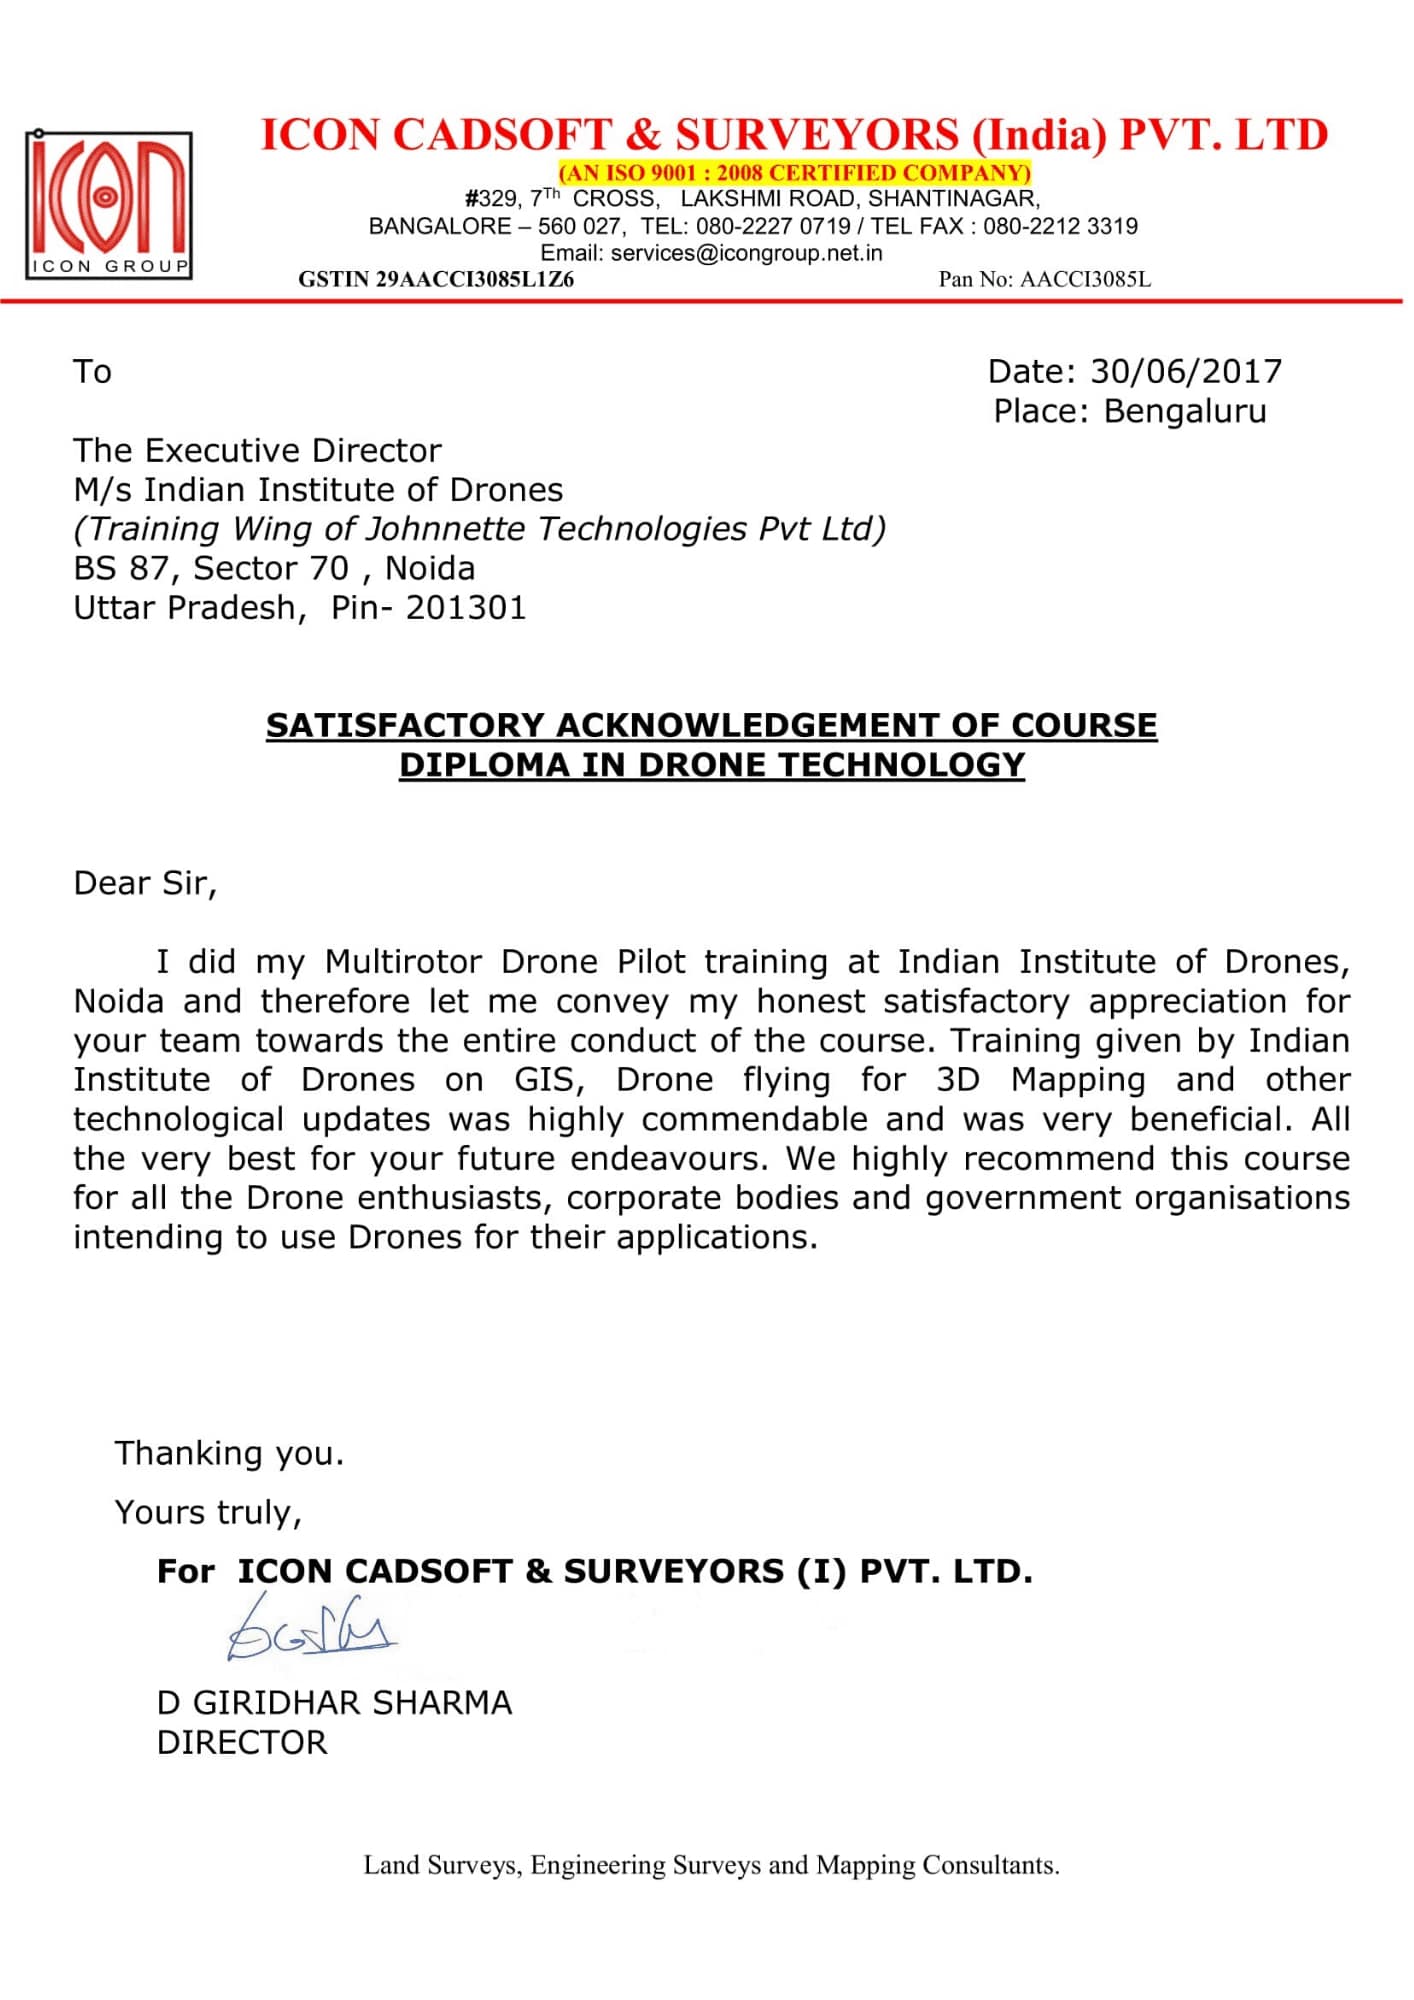 Satisfactory Letter for Drone Training Received from Icon Surveyors